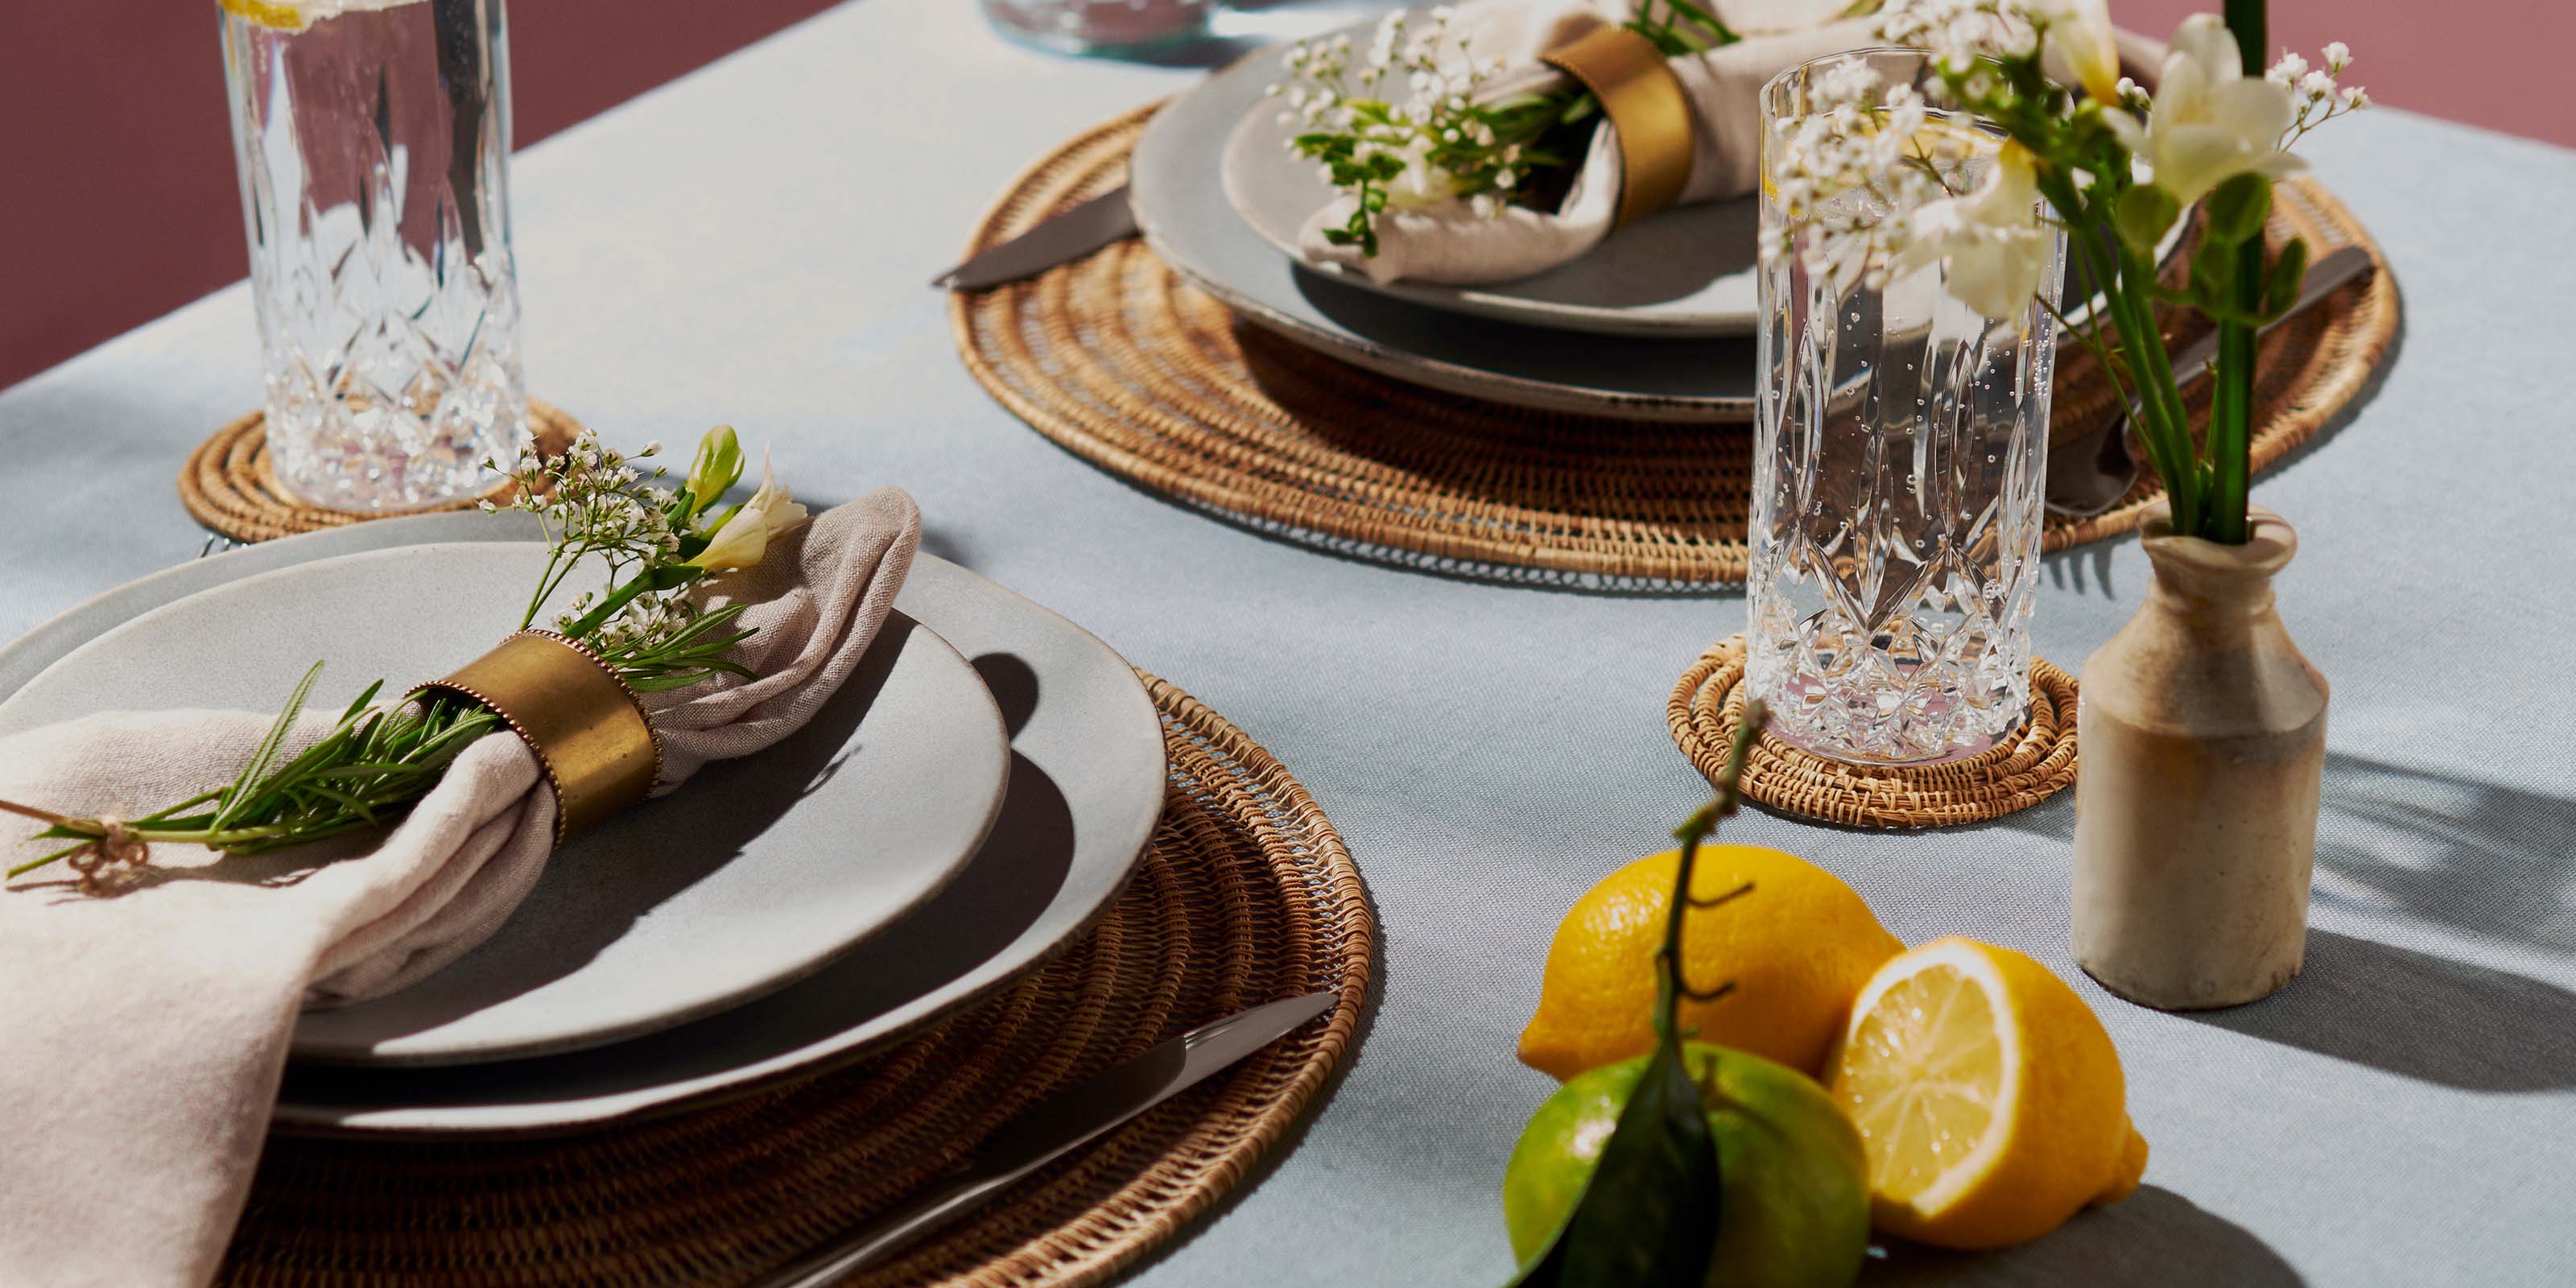 Table setting with handmade placemats and coasters, freshly cut lemons and a lime, crystal glasses, napkins and flowers